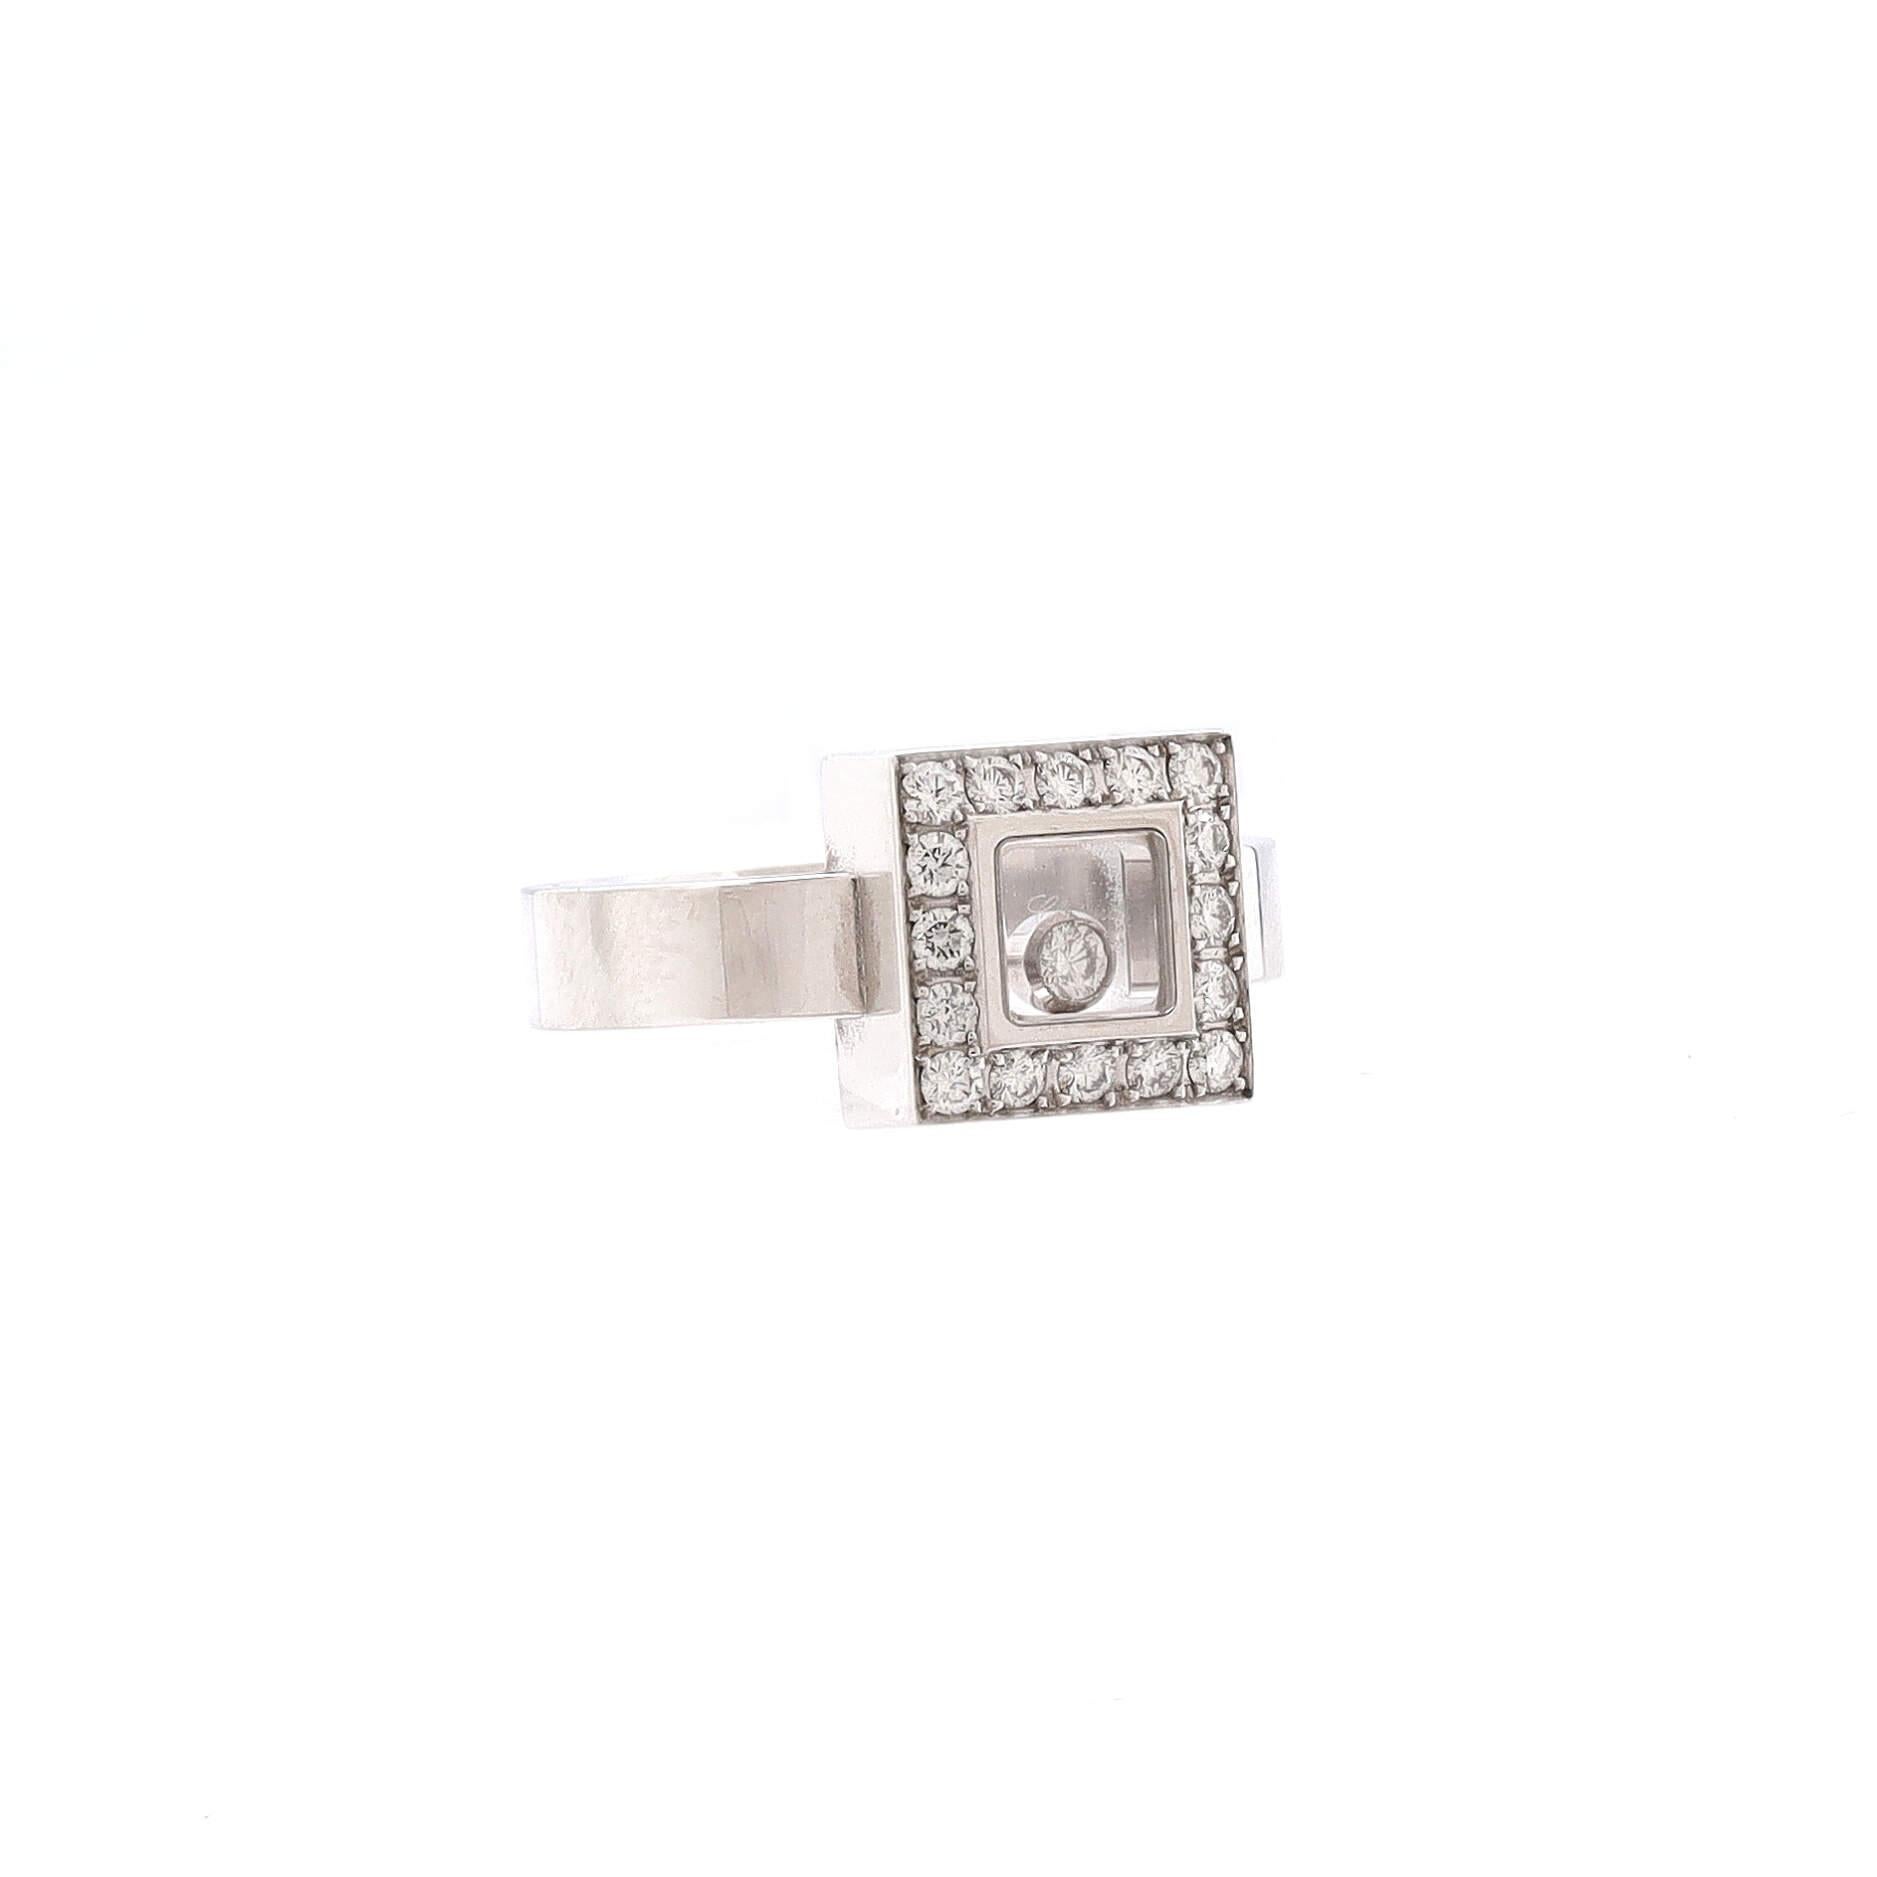 Condition: Very good. Moderate wear throughout.
Accessories: No Accessories
Measurements: Size: 6, Width: 4.00 mm
Designer: Chopard
Model: Happy Diamonds Square Ring 18K White Gold and Diamonds
Exterior Color: White Gold
Item Number: 159680/356